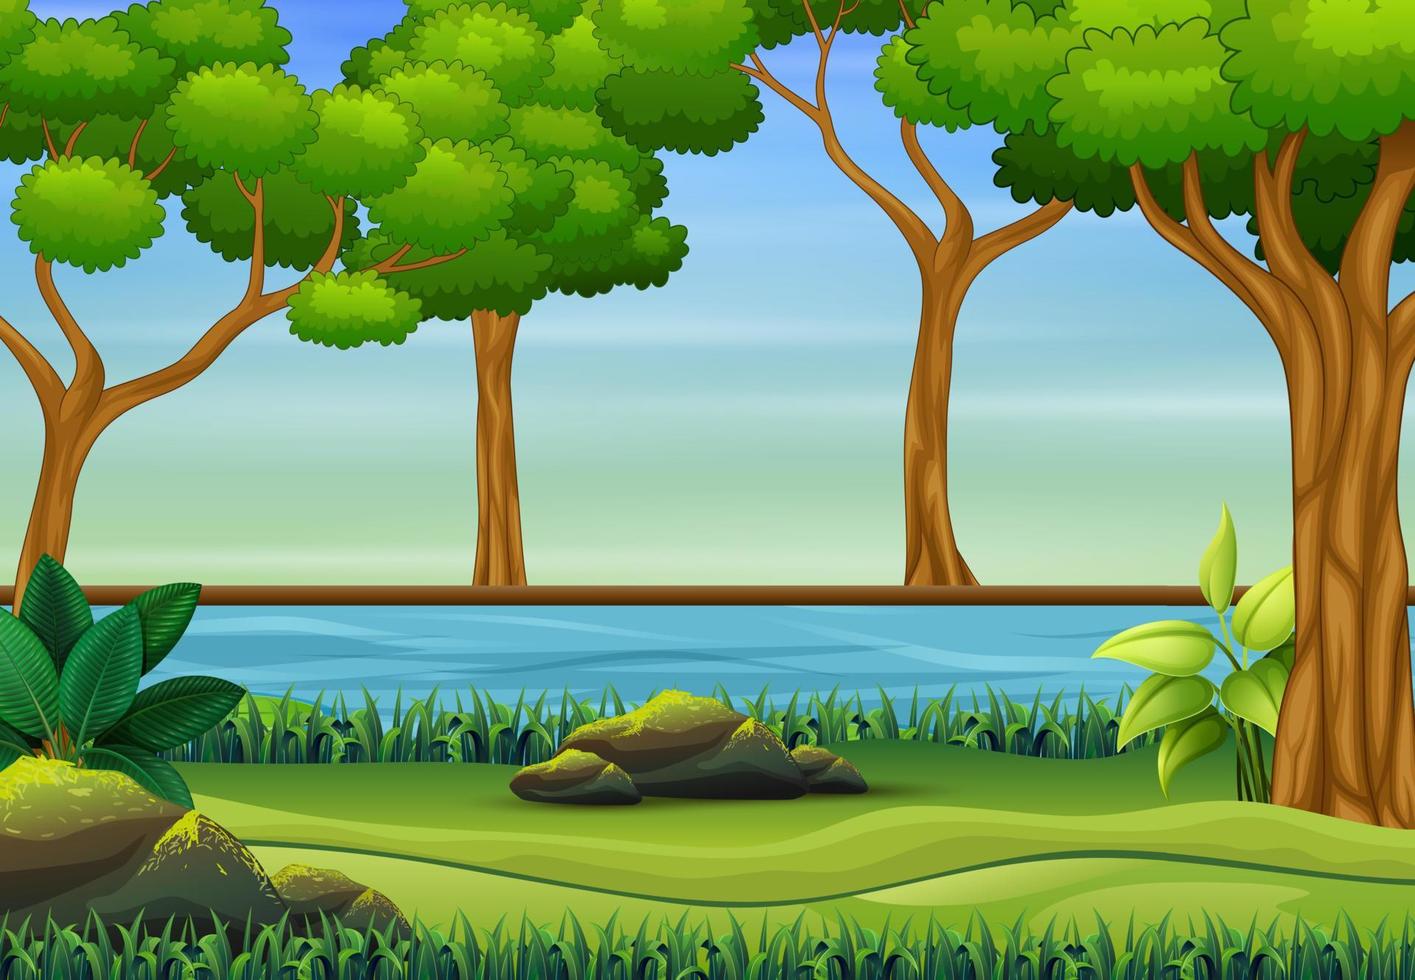 A natural lake with trees landscape vector